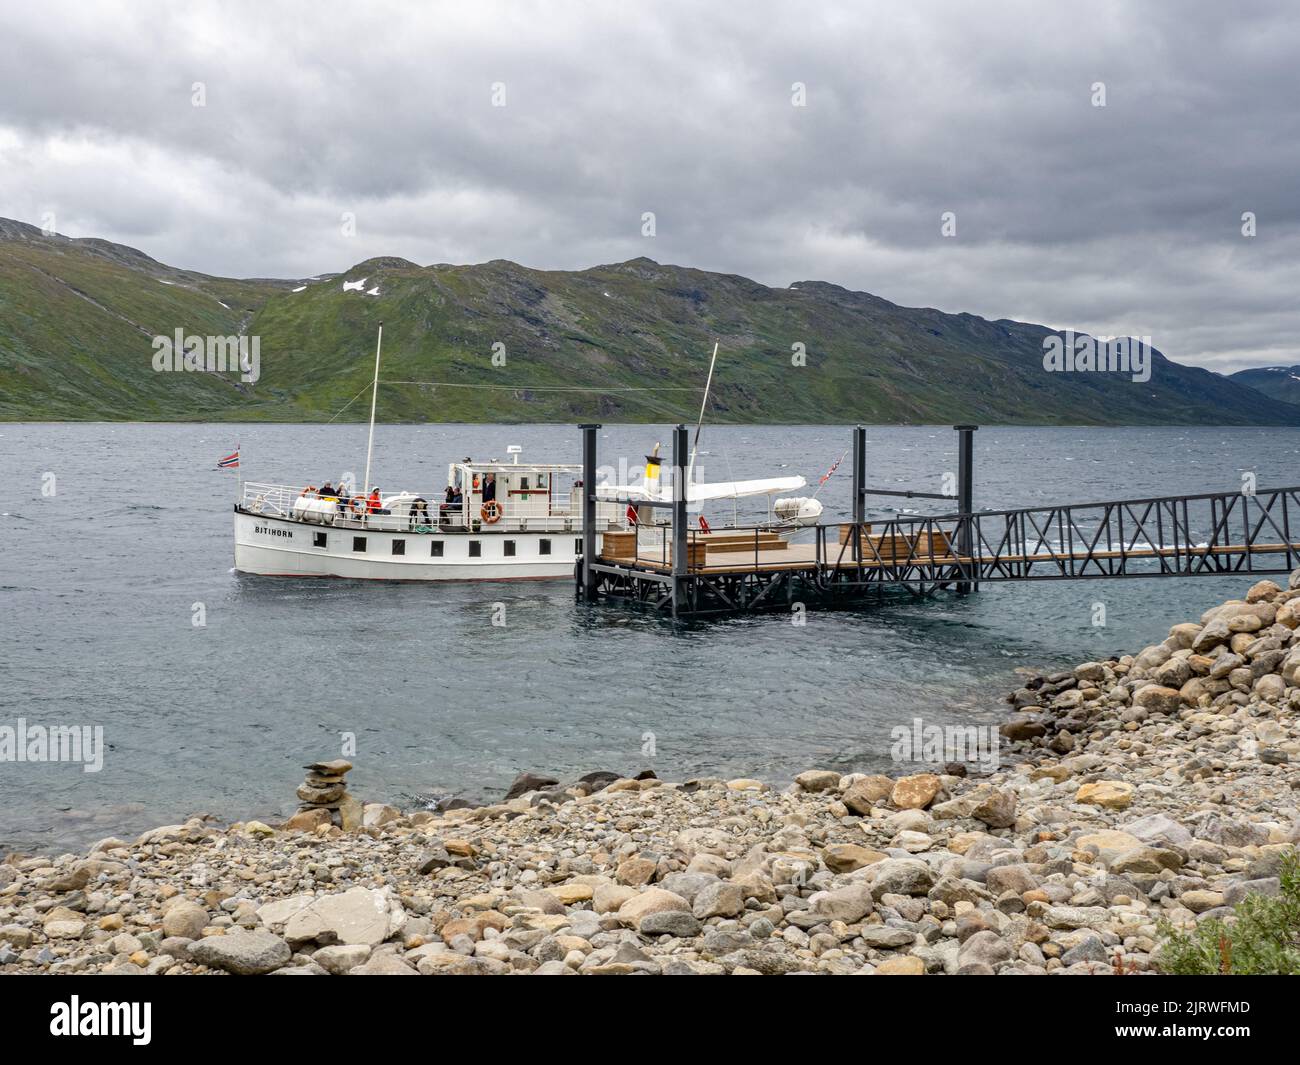 The ferry boat Bitihorn collecting passengers from the jetty at Torfinsbu on lake Bygdin in the Jotunheimen National Park Norway Stock Photo